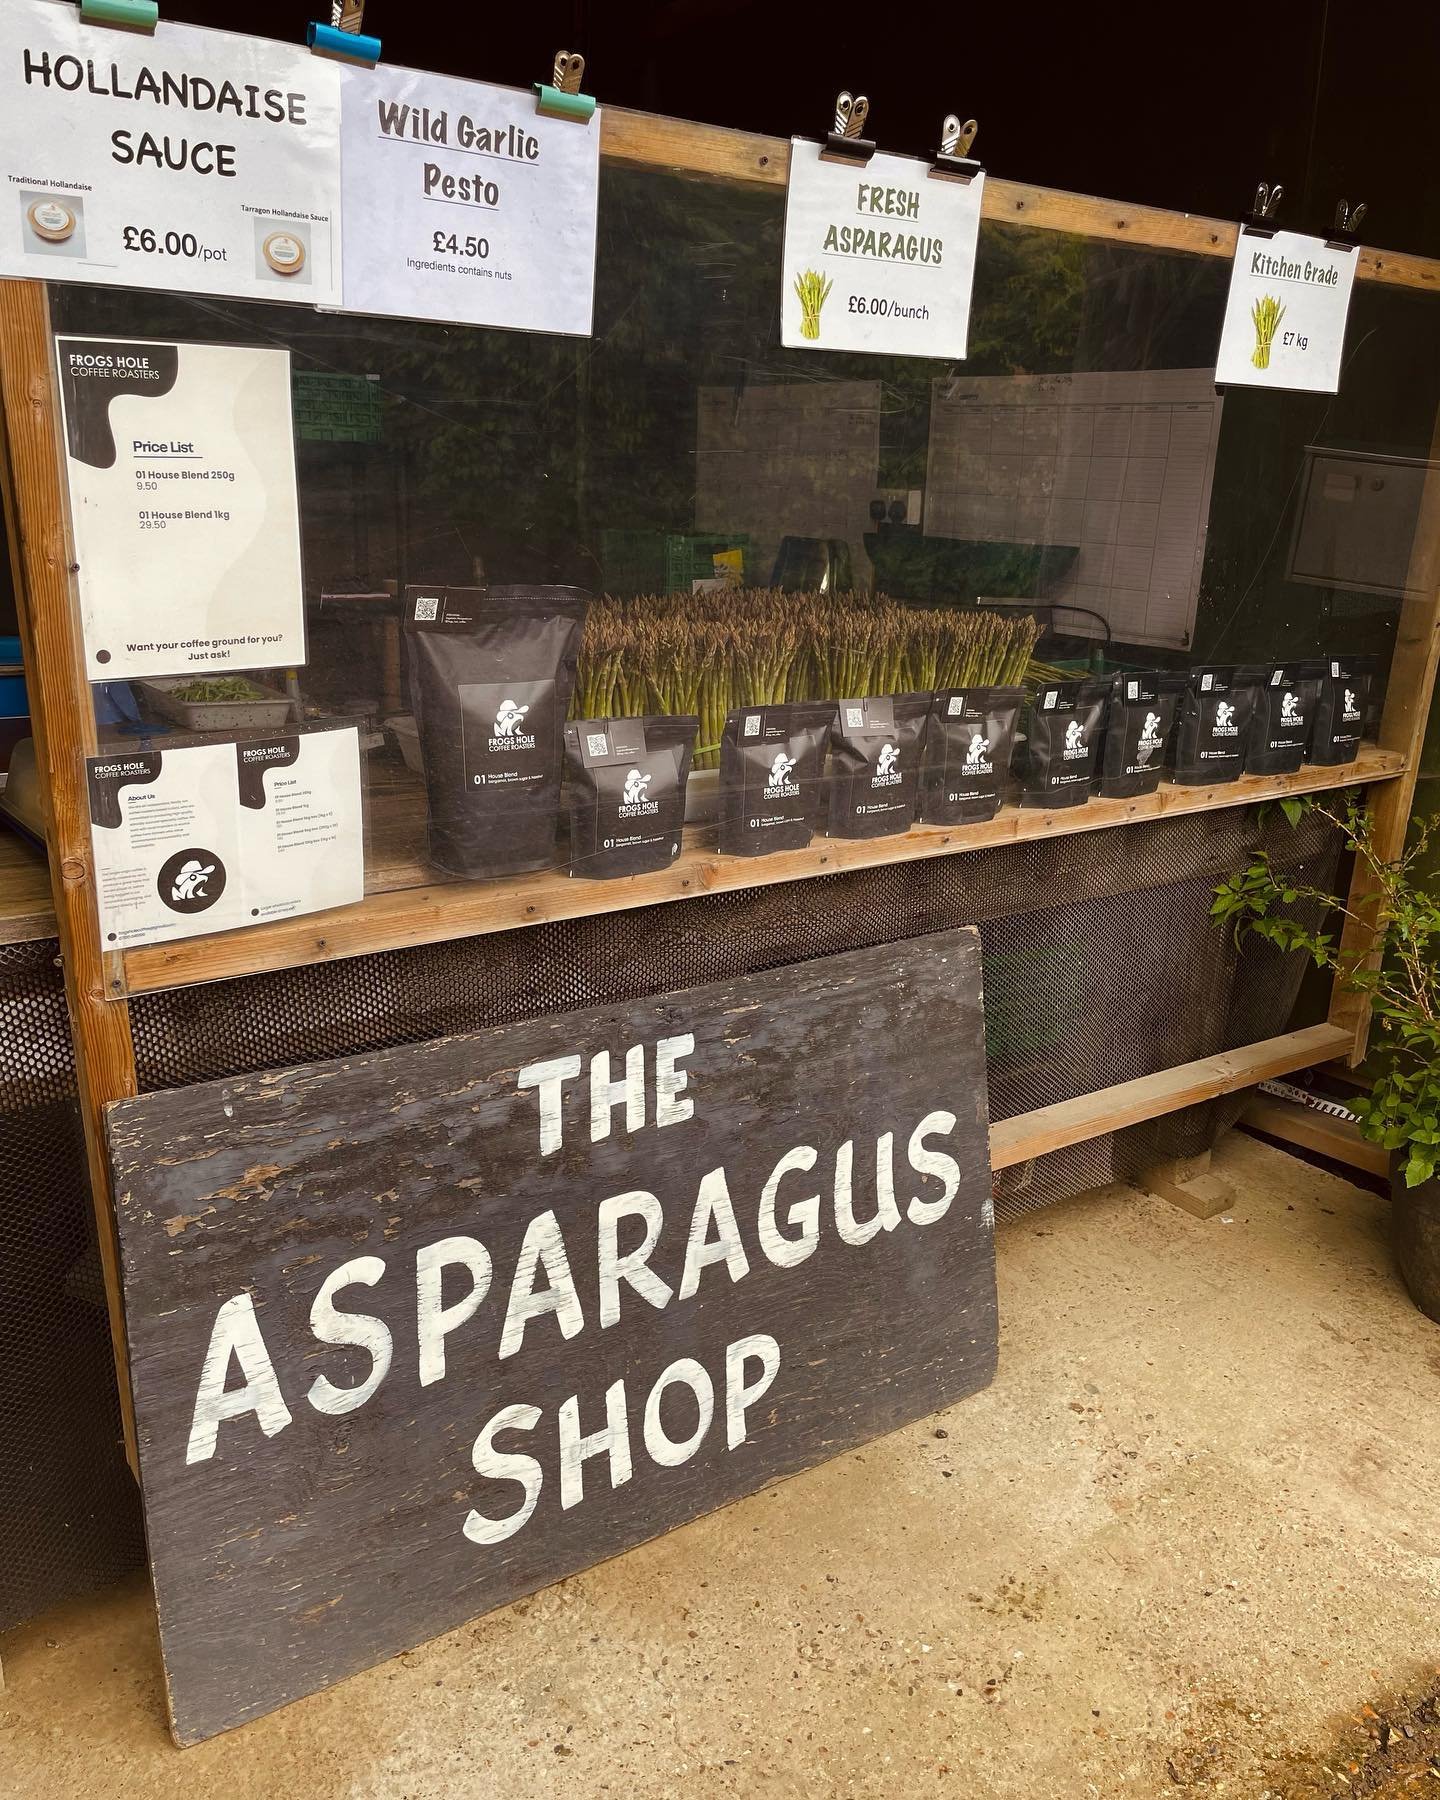 If you are local to Kent, come and say hello and pick up a bag of our coffee at our pop up shop! We are also selling home grown asparagus for the season, wild garlic pesto, and other seasonal treats!

Frogs Hole Farm, Sissinghurst Road, Biddenden, Ke